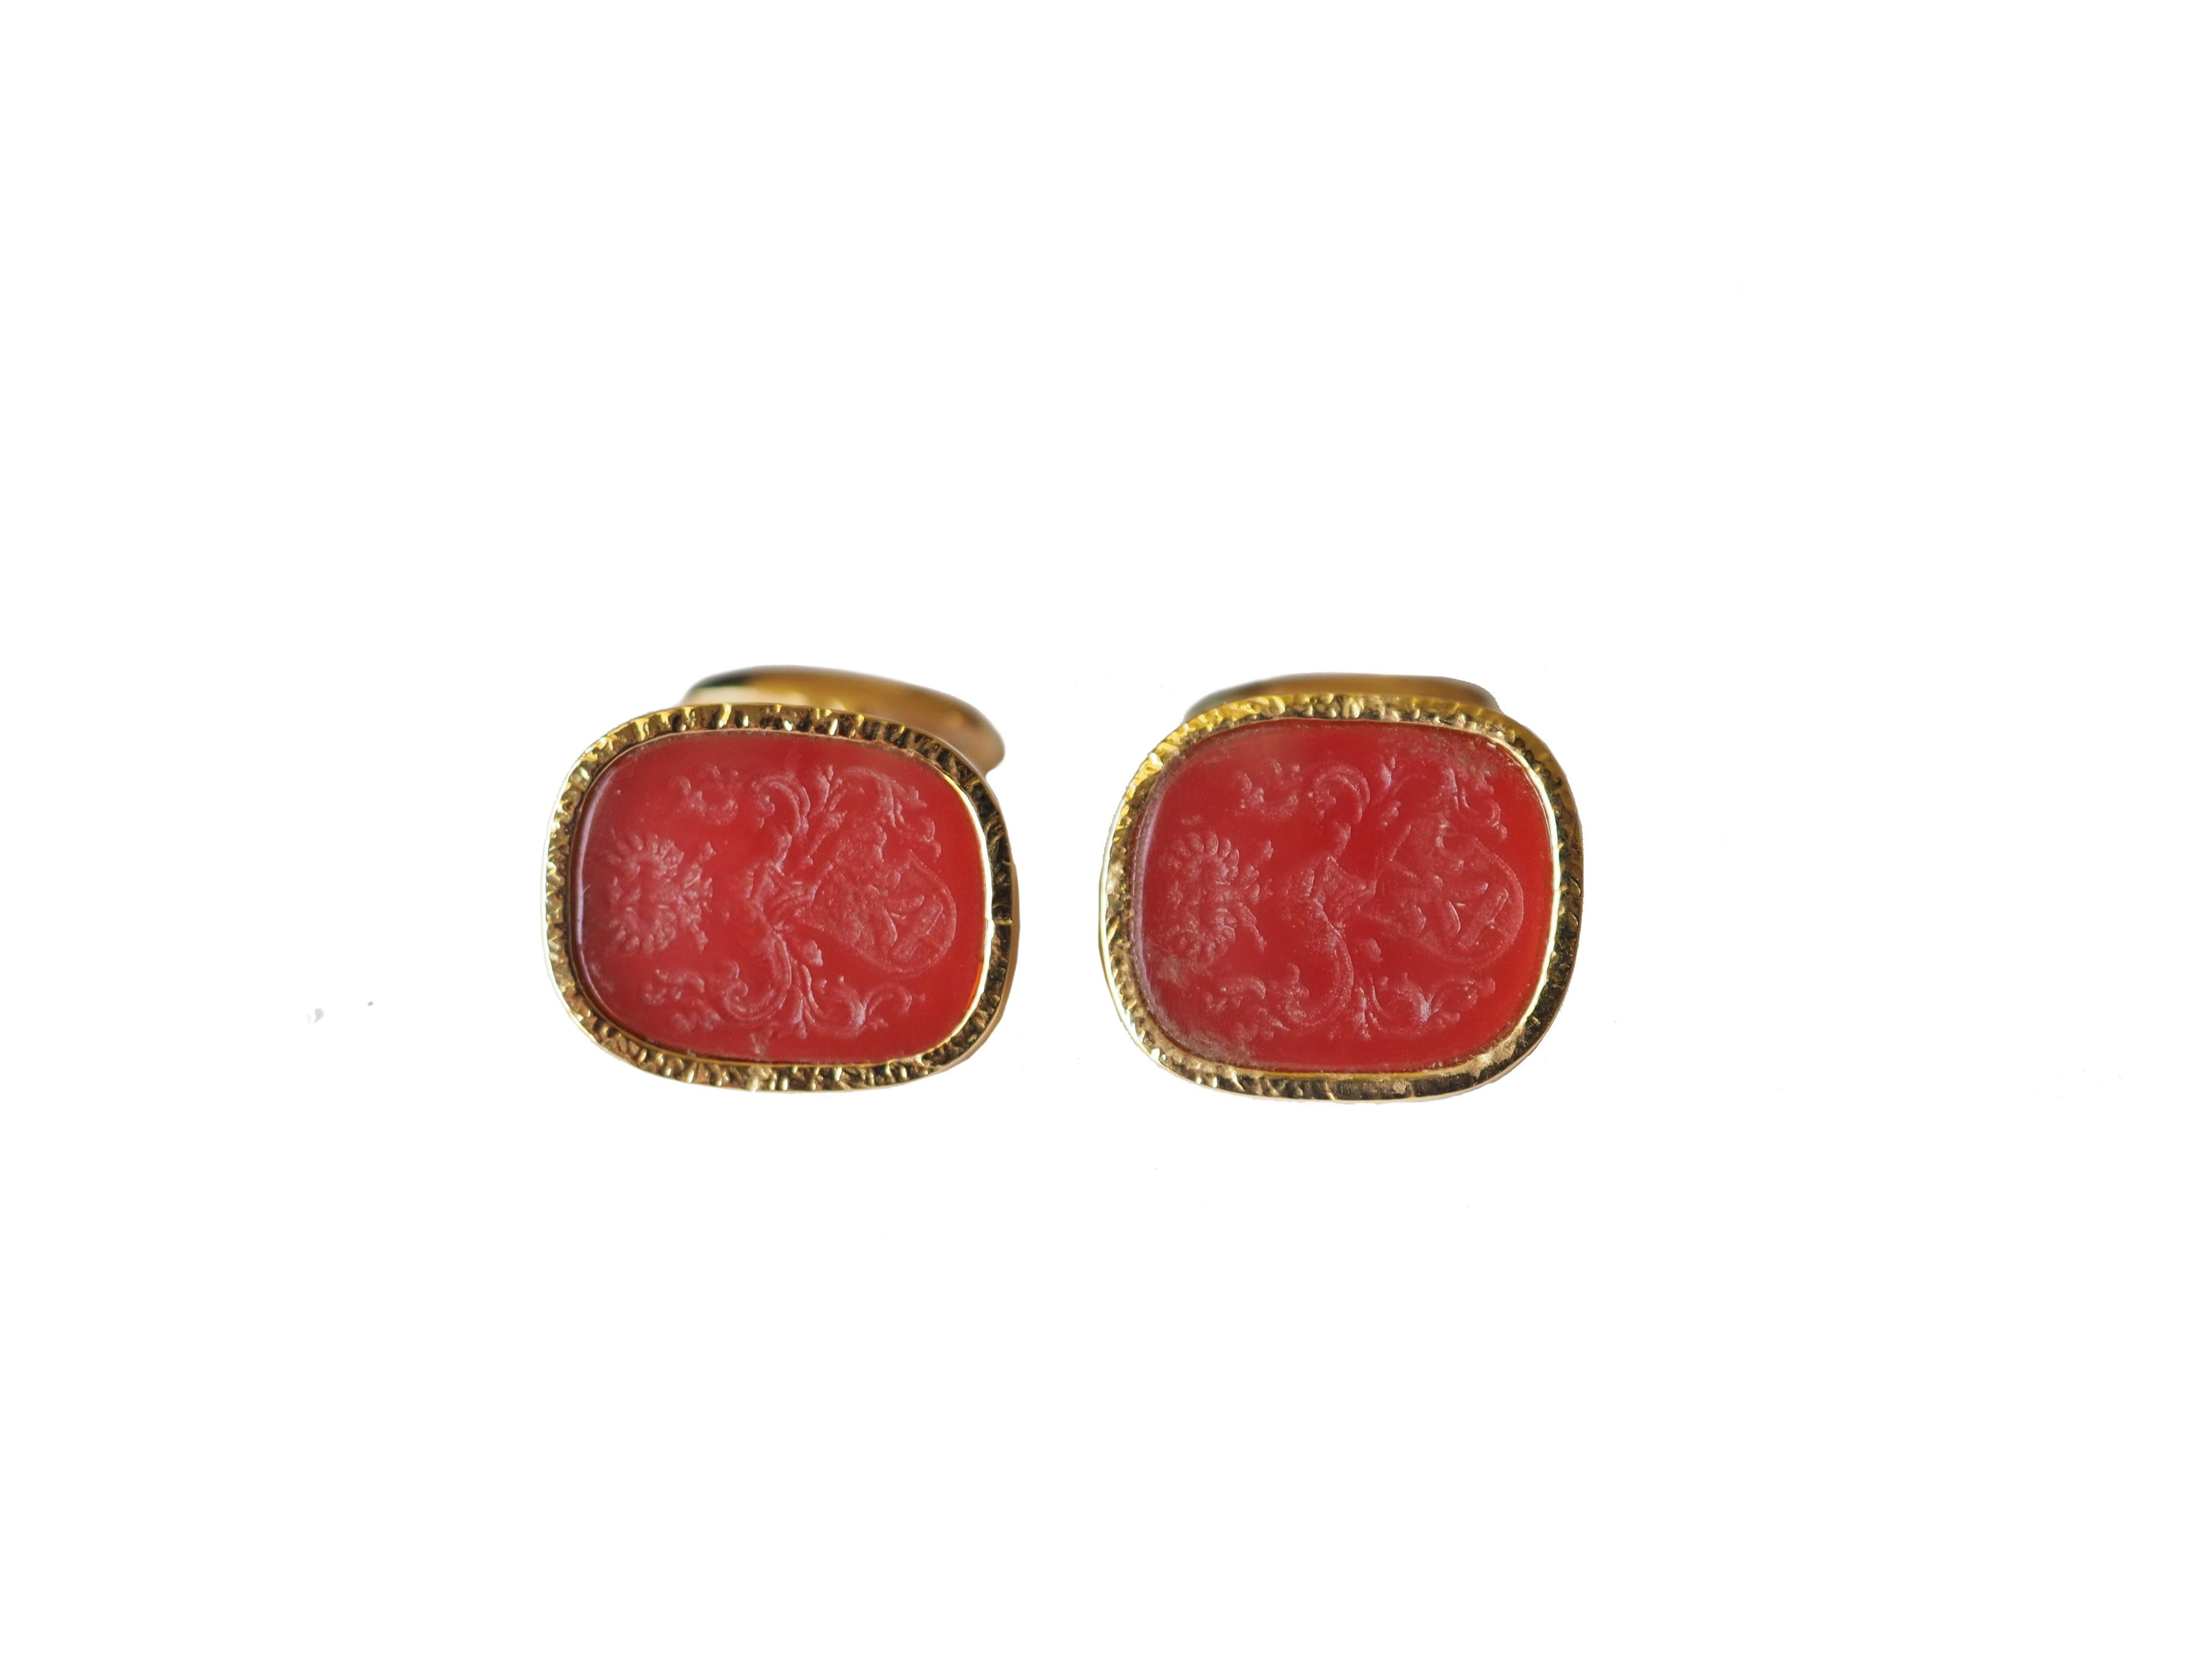 Antiques cameo  carved  Carnelian cufflinks 18 Kt Gold gr. 14,40. measures 1,5x 1,00 cm.
All Giulia Colussi jewelry is new and has never been previously owned or worn. Each item will arrive at your door beautifully gift wrapped in our boxes, put